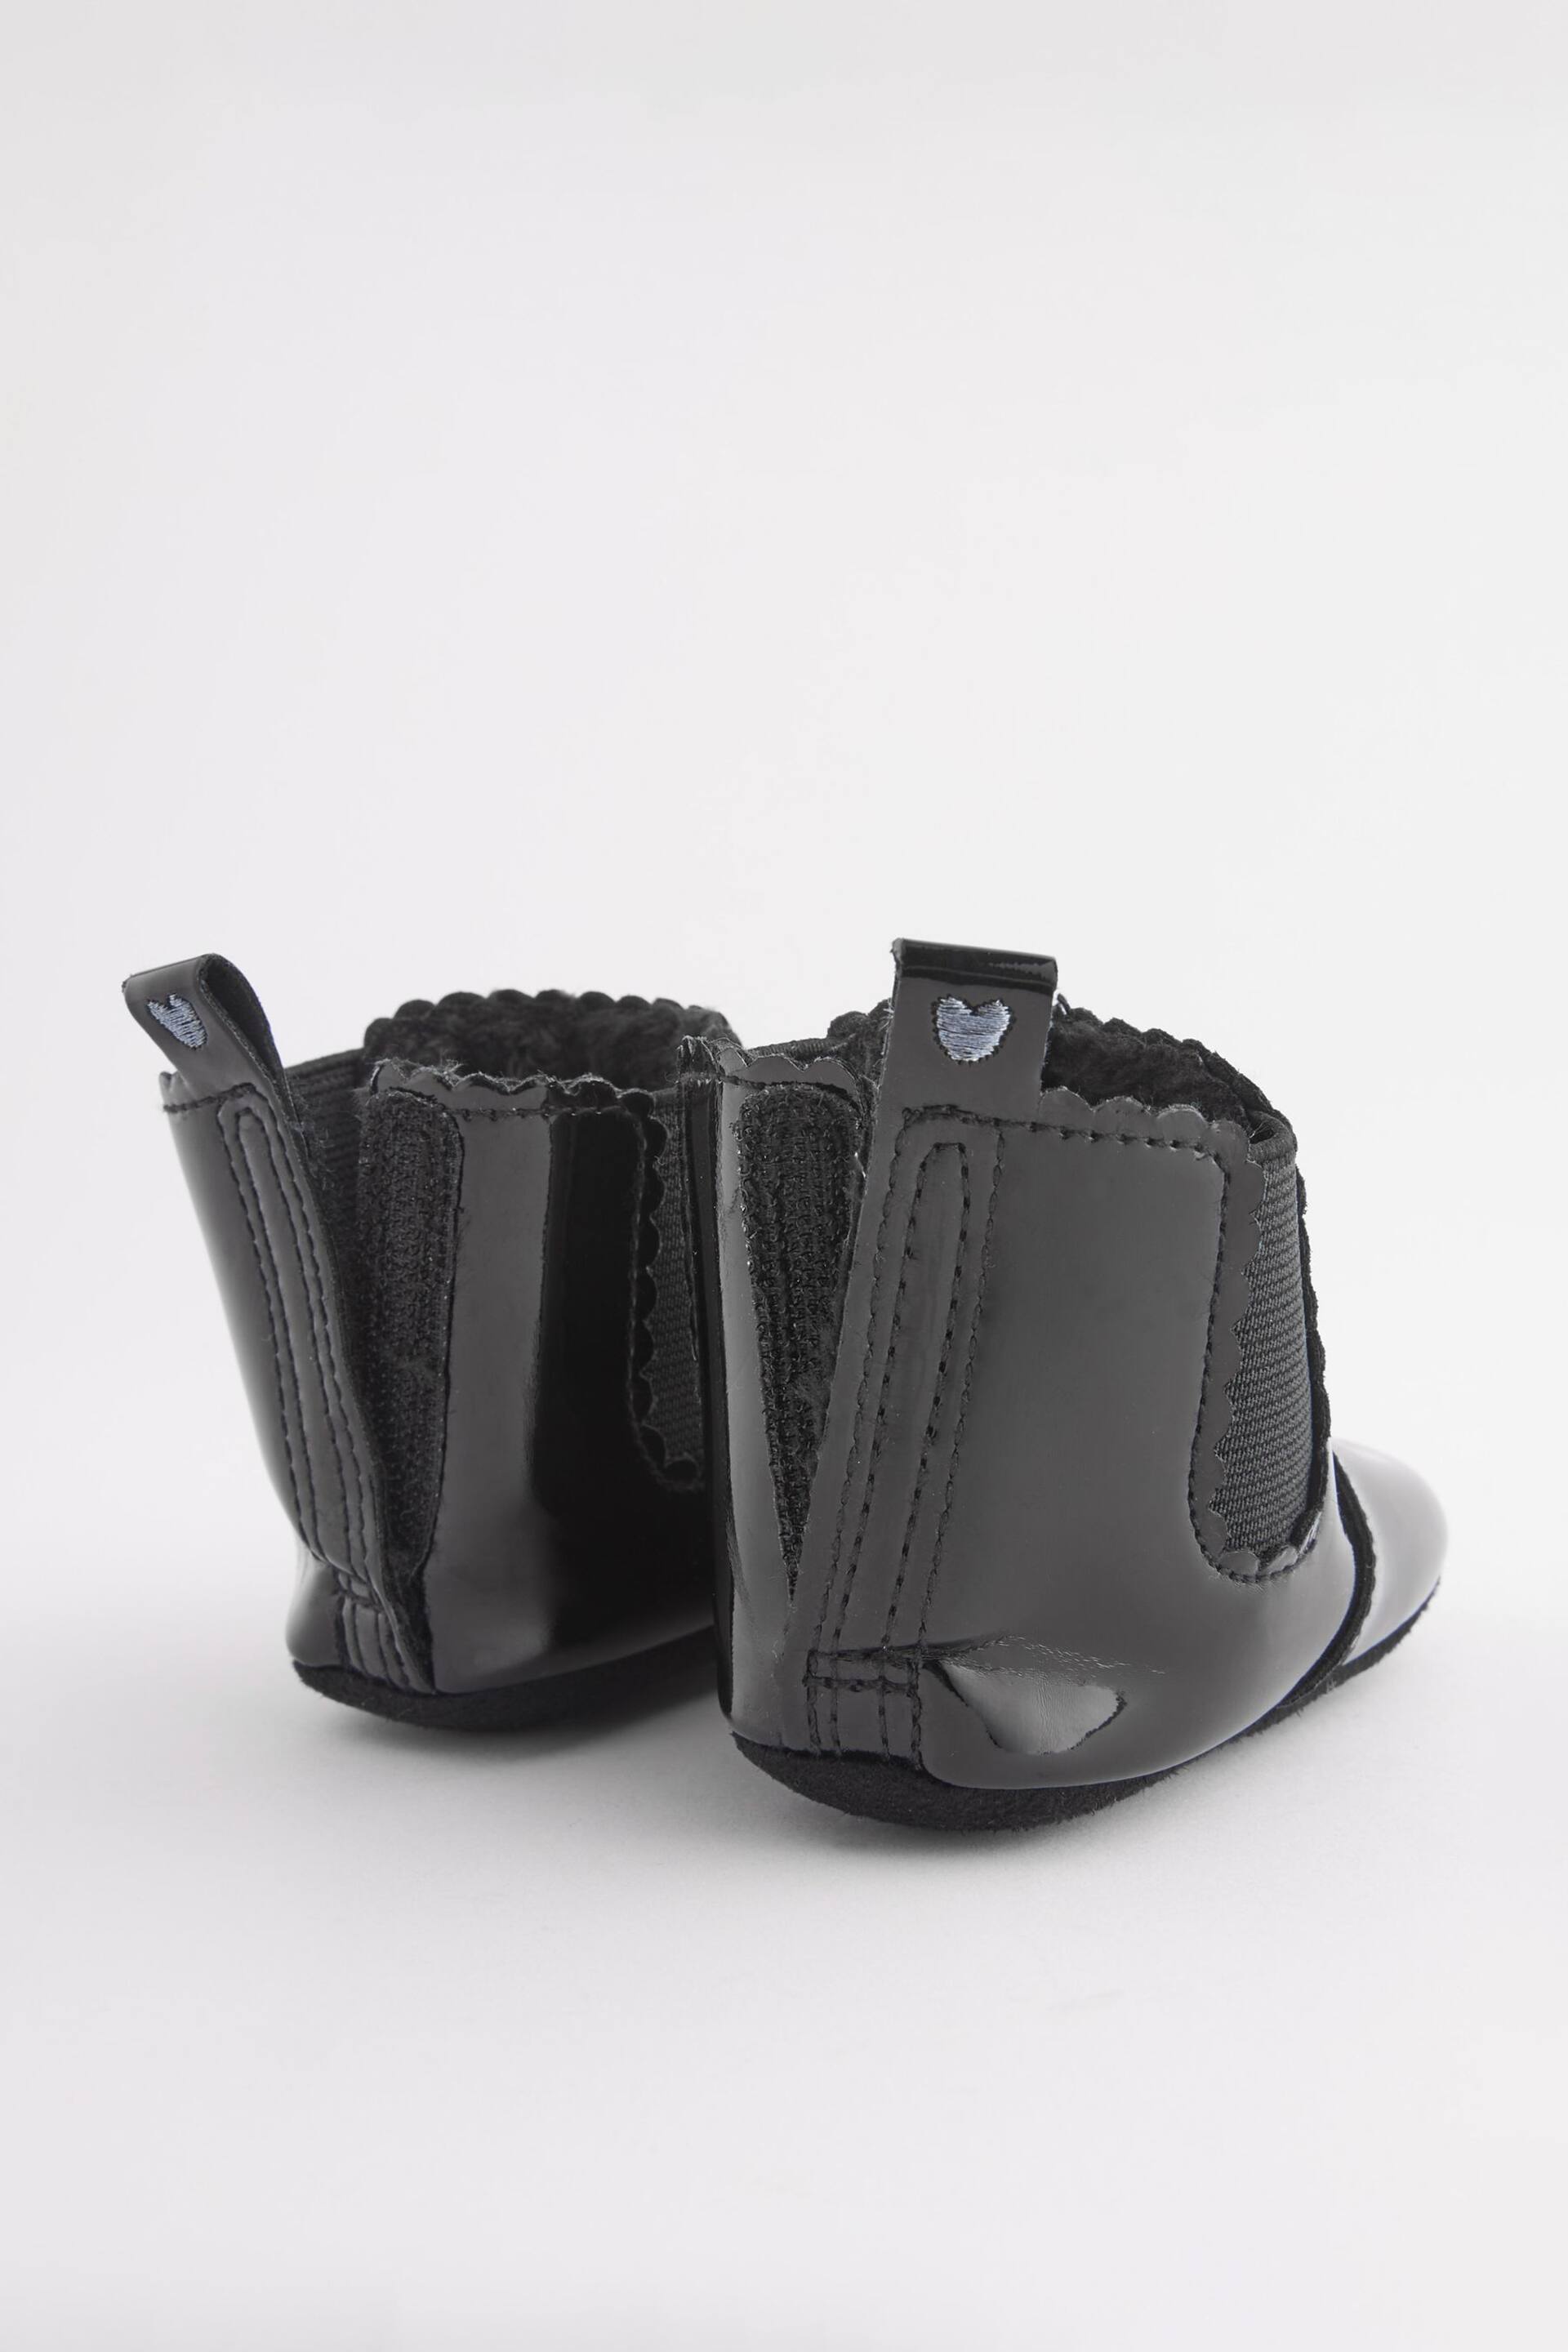 Black Patent Chelsea Baby Boots (0-24mths) - Image 5 of 7